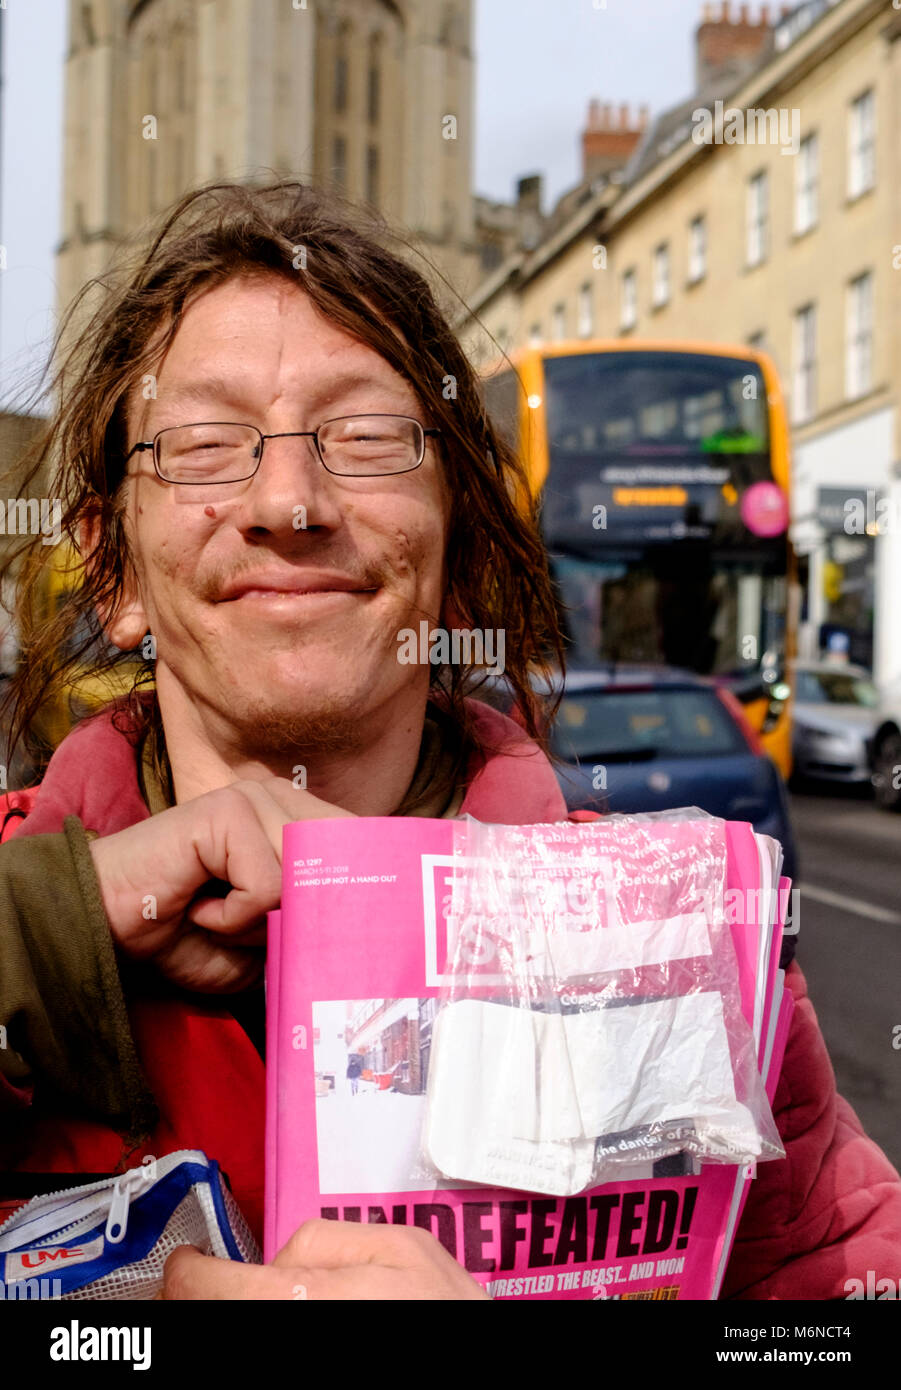 Bristol, UK. 5th March, 2018. Jack Richardson the popular Bristol Big Issue seller has gone contactless. The gift of a used smart phone and the discounted purchase of a card reader had led to increased sales. Jack says his health has made other jobs difficult for him but he loves selling the Big Issue. Going contactless is a smart move as less people carry cash. ©JMF News/Alamy Live News Stock Photo